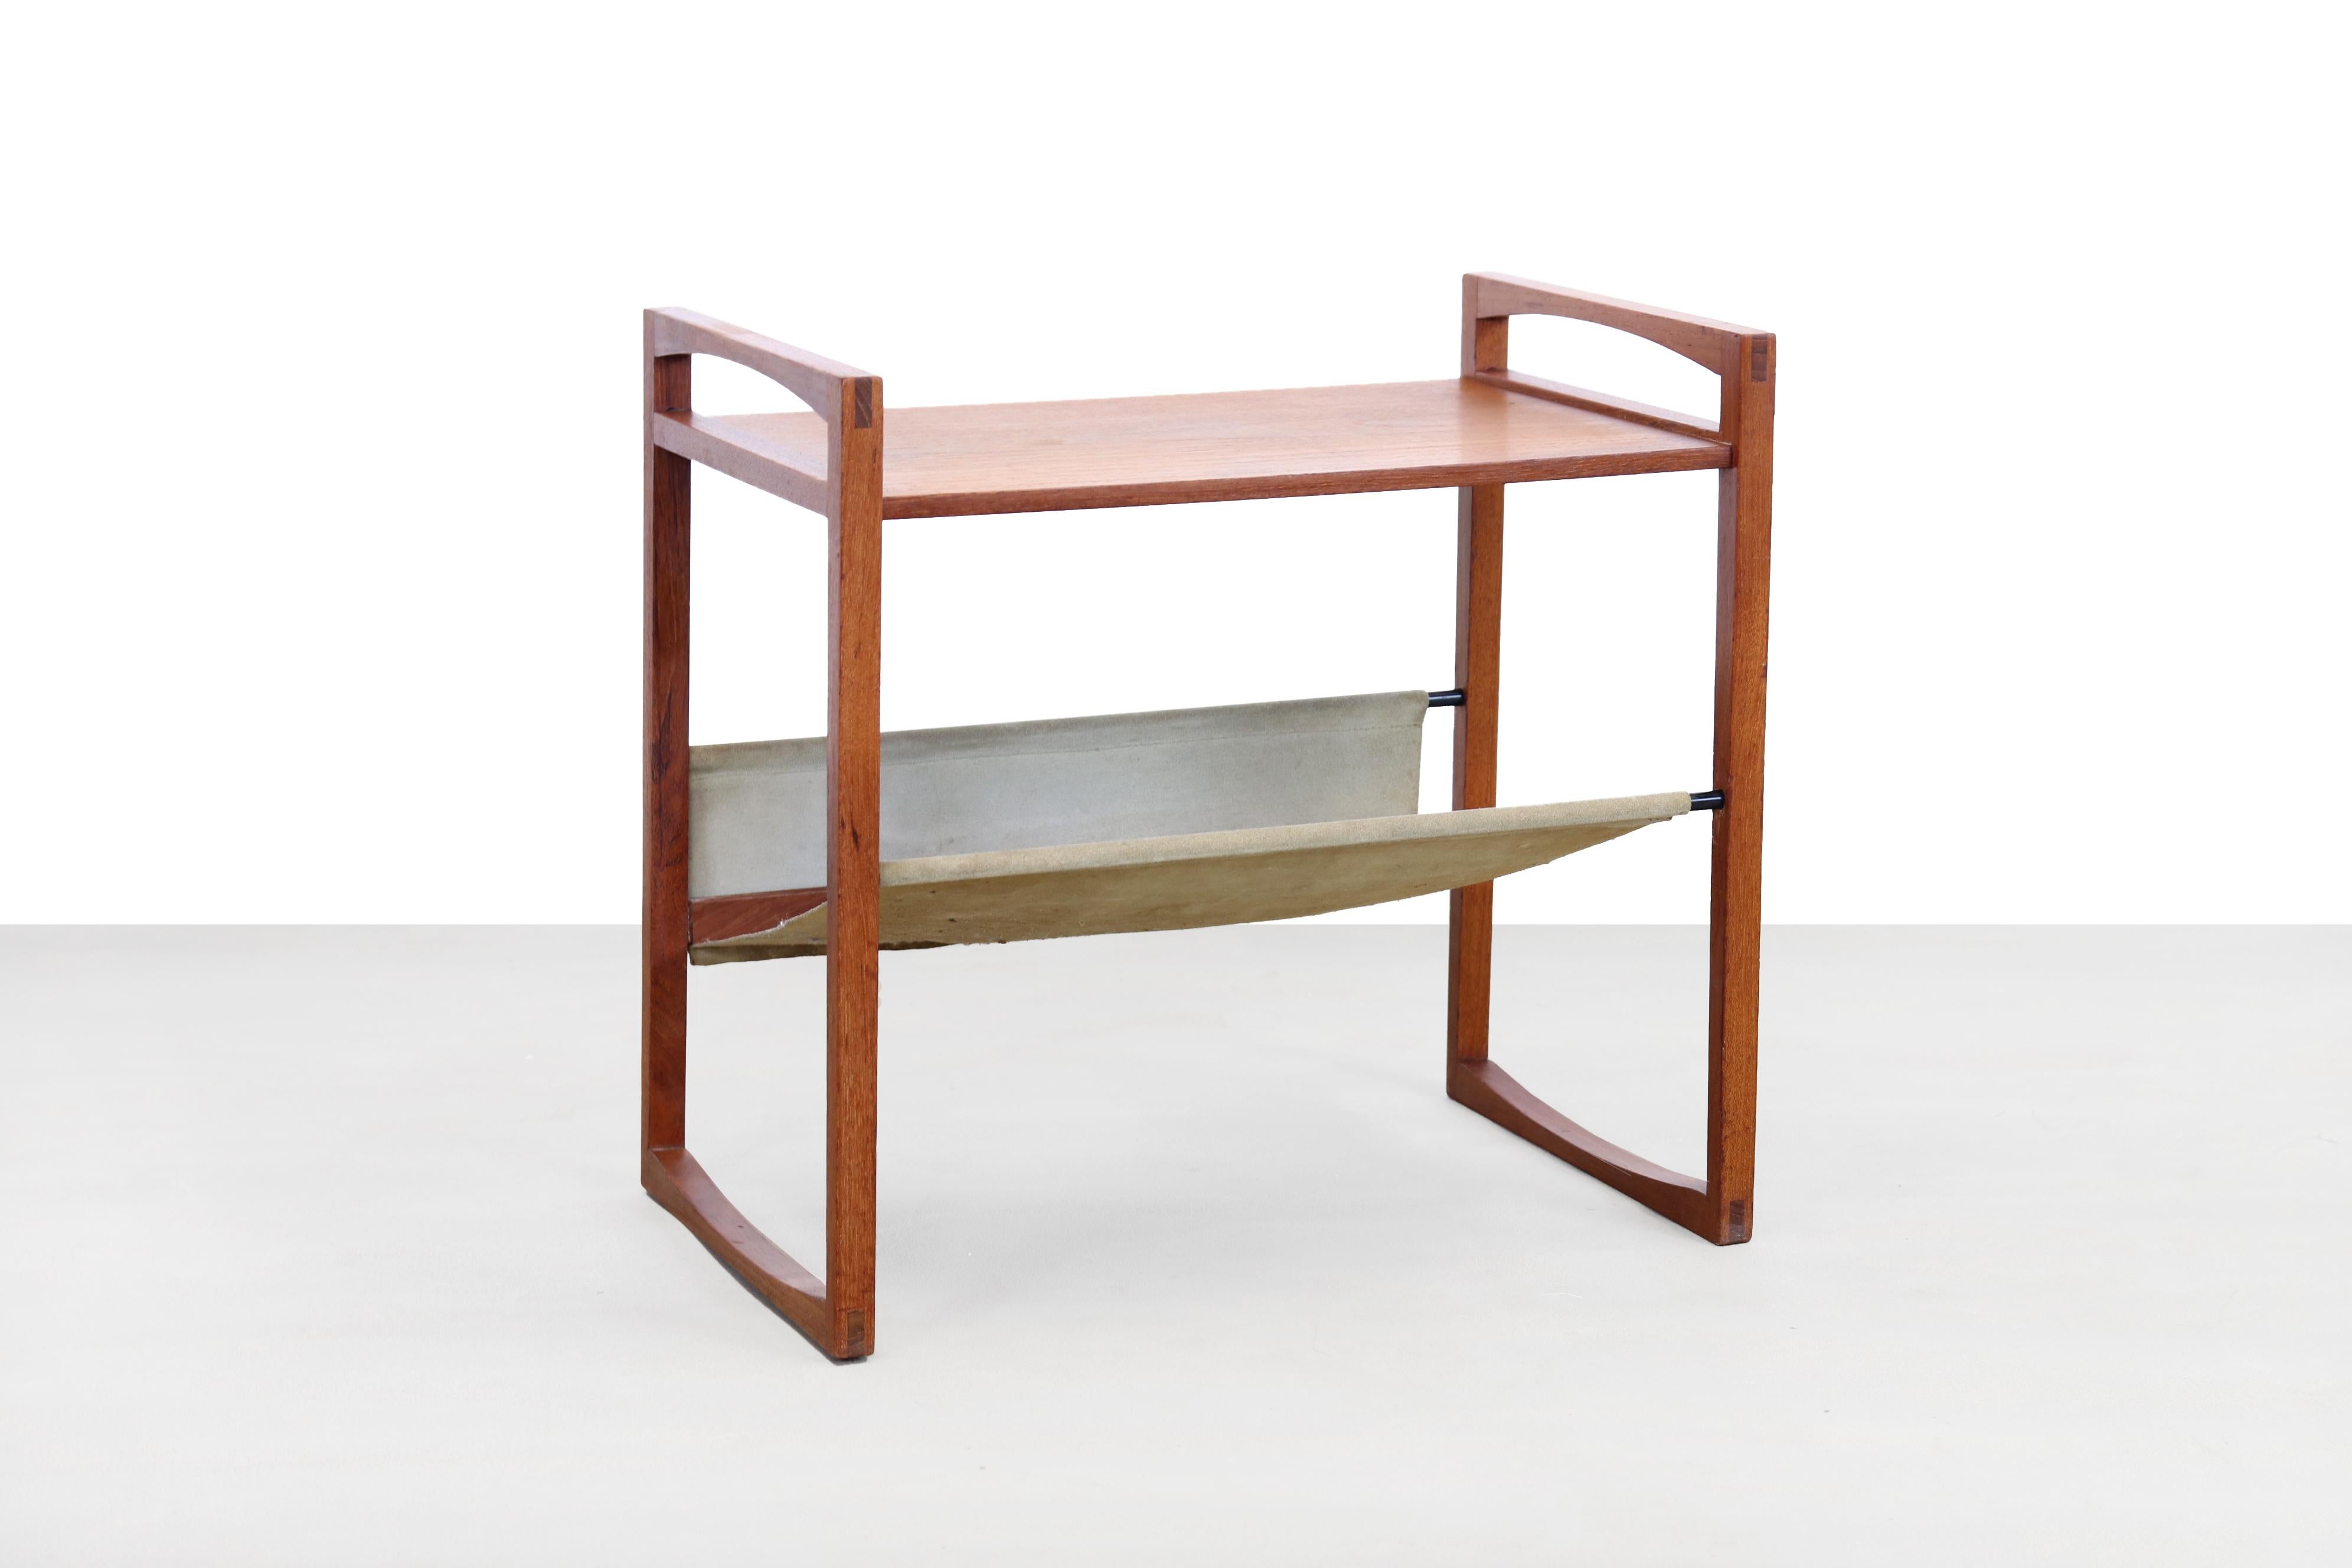 Danish design magazine rack and side table designed by Kai Kristiansen for Sika Møbler. The bottom magazine compartment is made of suede. The table is made of solid teak and has beautiful details. For example, look at the wood joints in each corner.